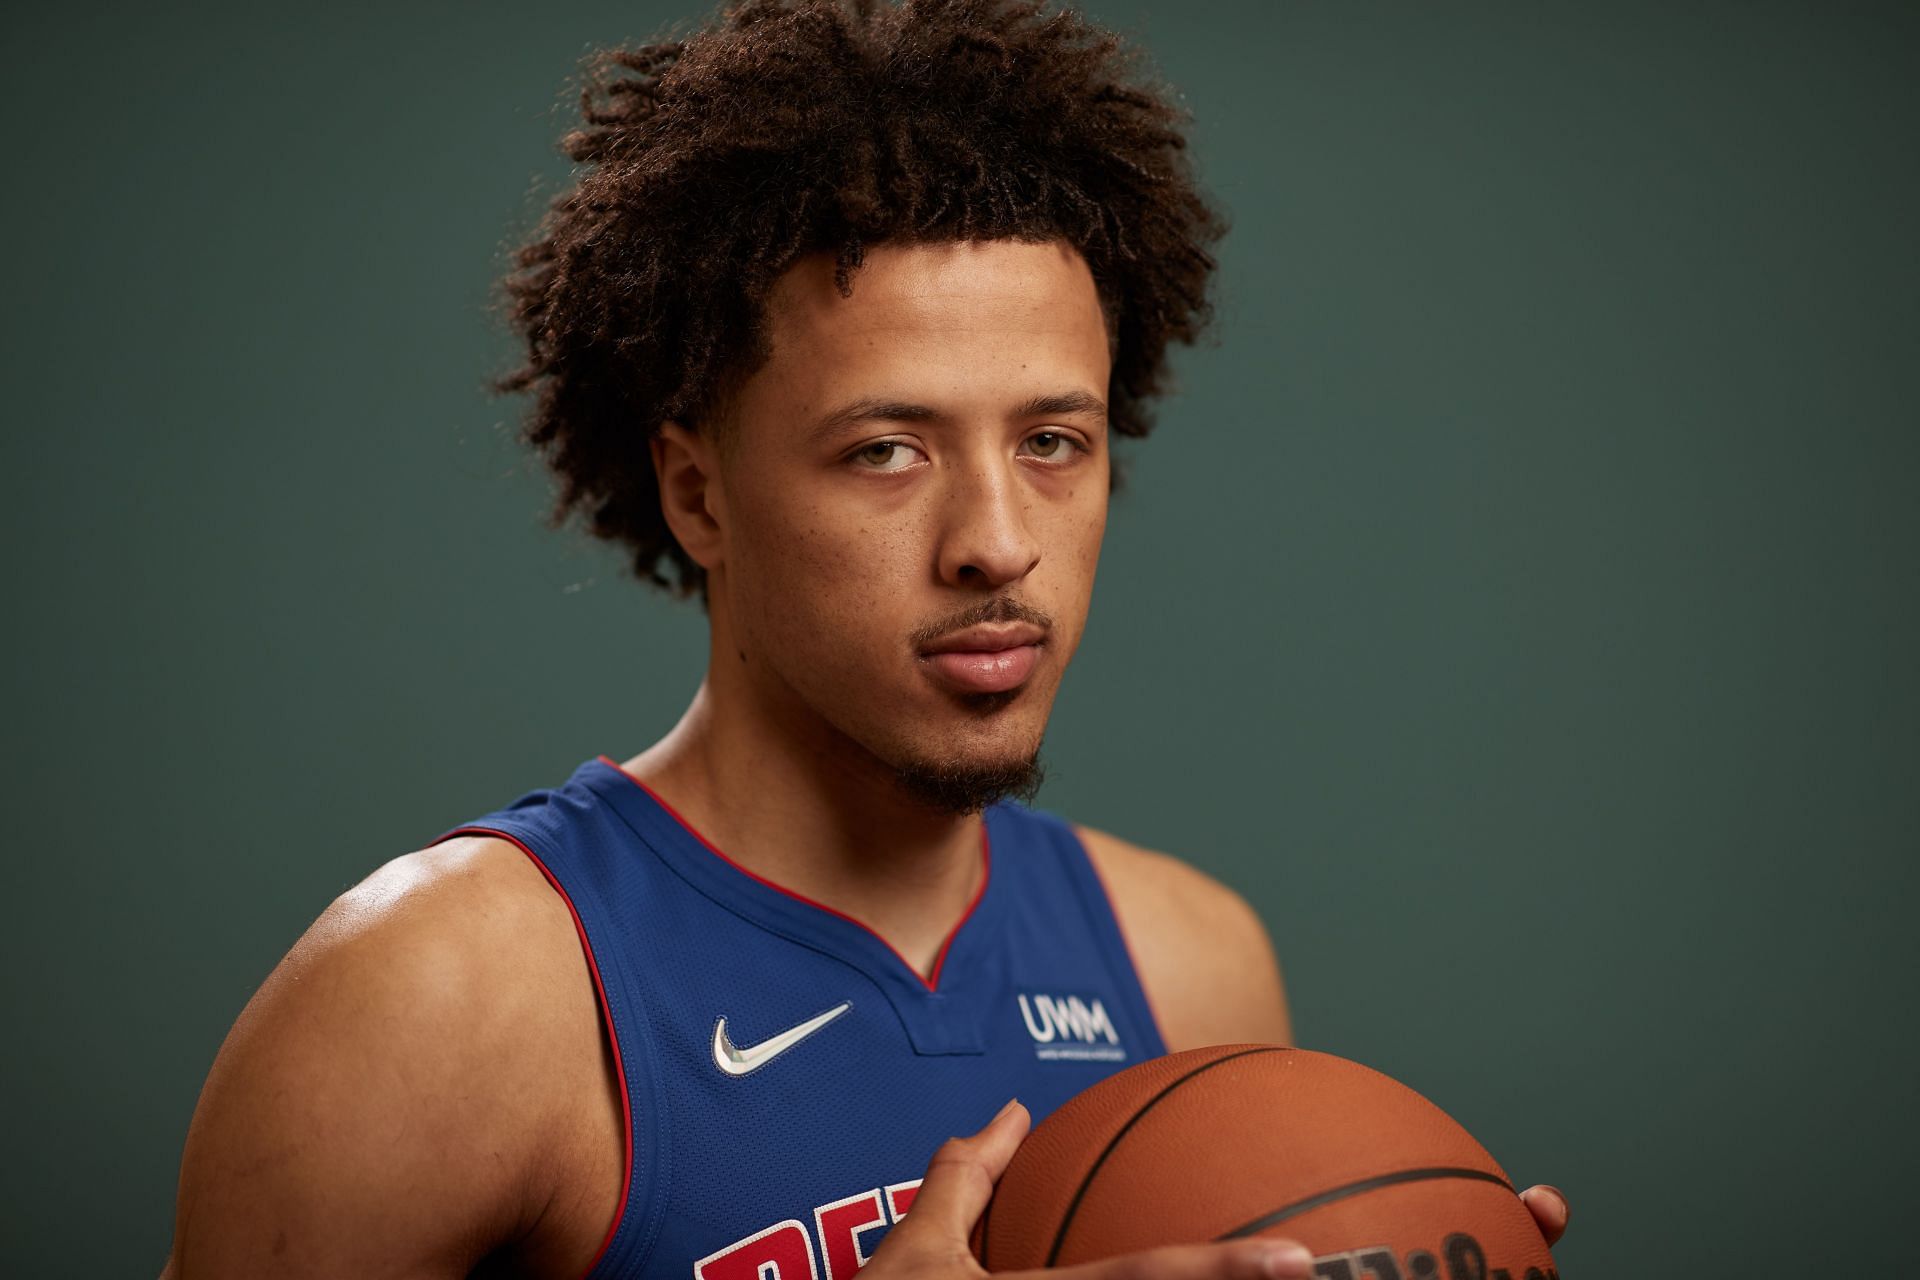 Cade Cunningham at the 2021 NBA Rookie Photo Shoot